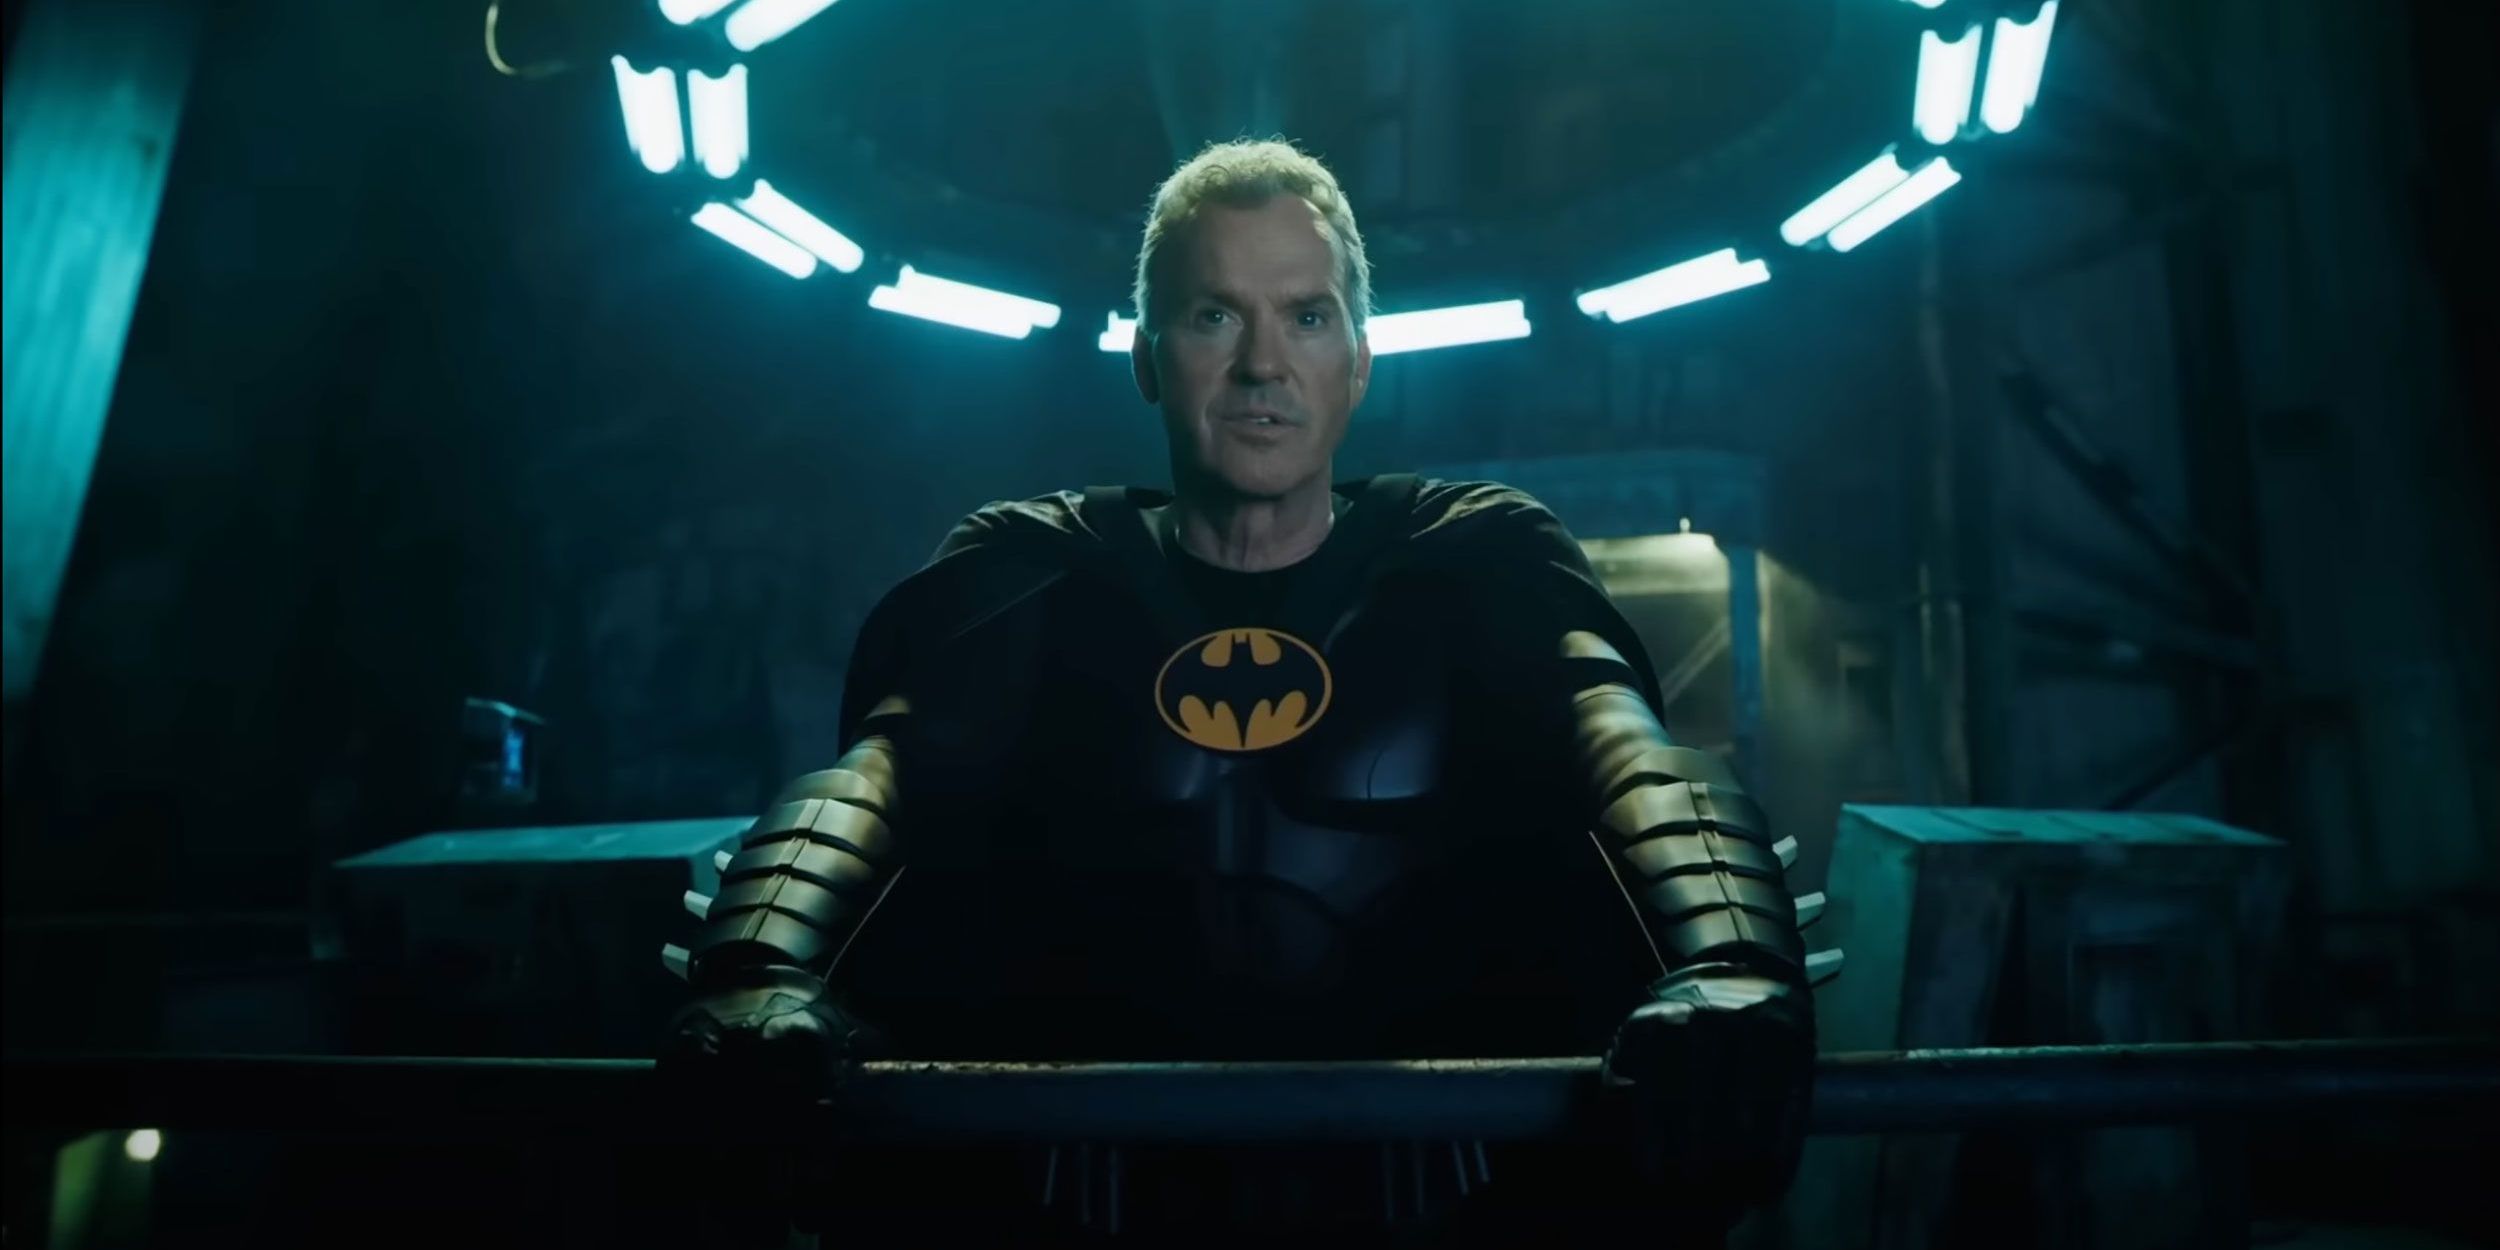 Actor Michael Keaton reprising his role as Batman in The Flash live-action movie.